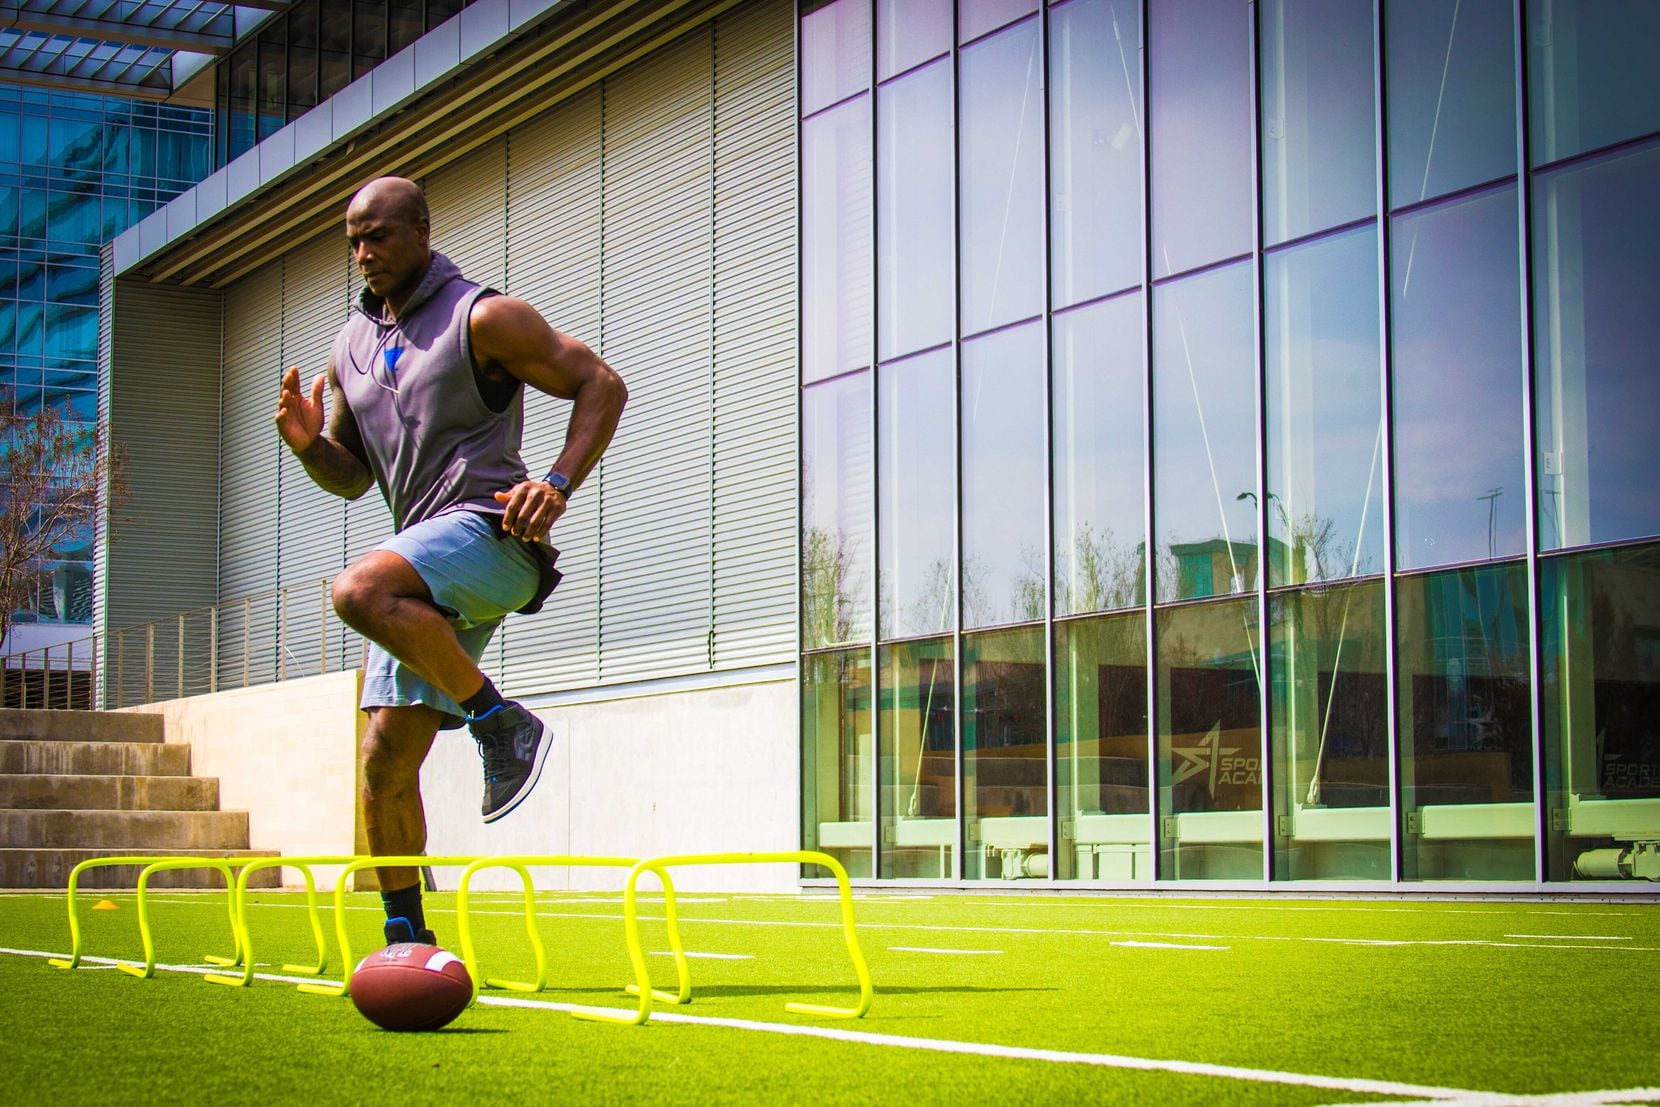 Dallas teen Isaac Edwards captured this image of former Dallas Cowboys outside linebacker DeMarcus Ware working out at The Star in Frisco. Isaac got the surprise visit from Ware after winning a photo contest and participating in a photo boot camp.